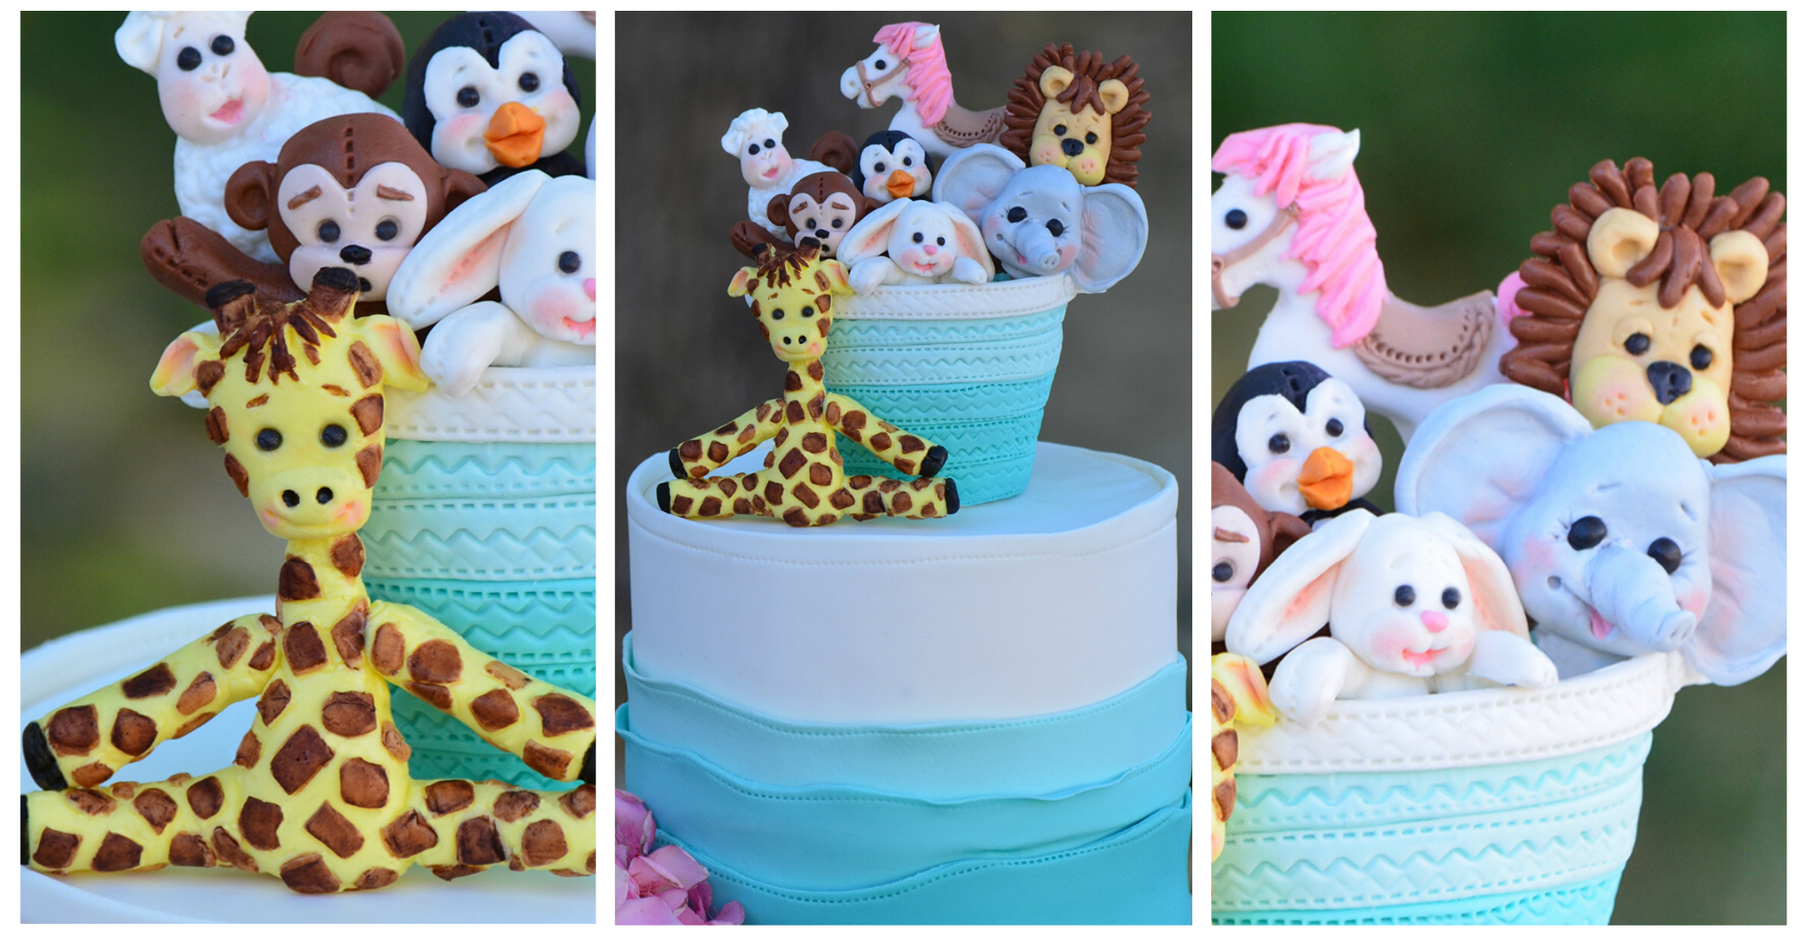 An Adorable Toy Hamper Cake Topper by guest Design Team member Mitchie Curran